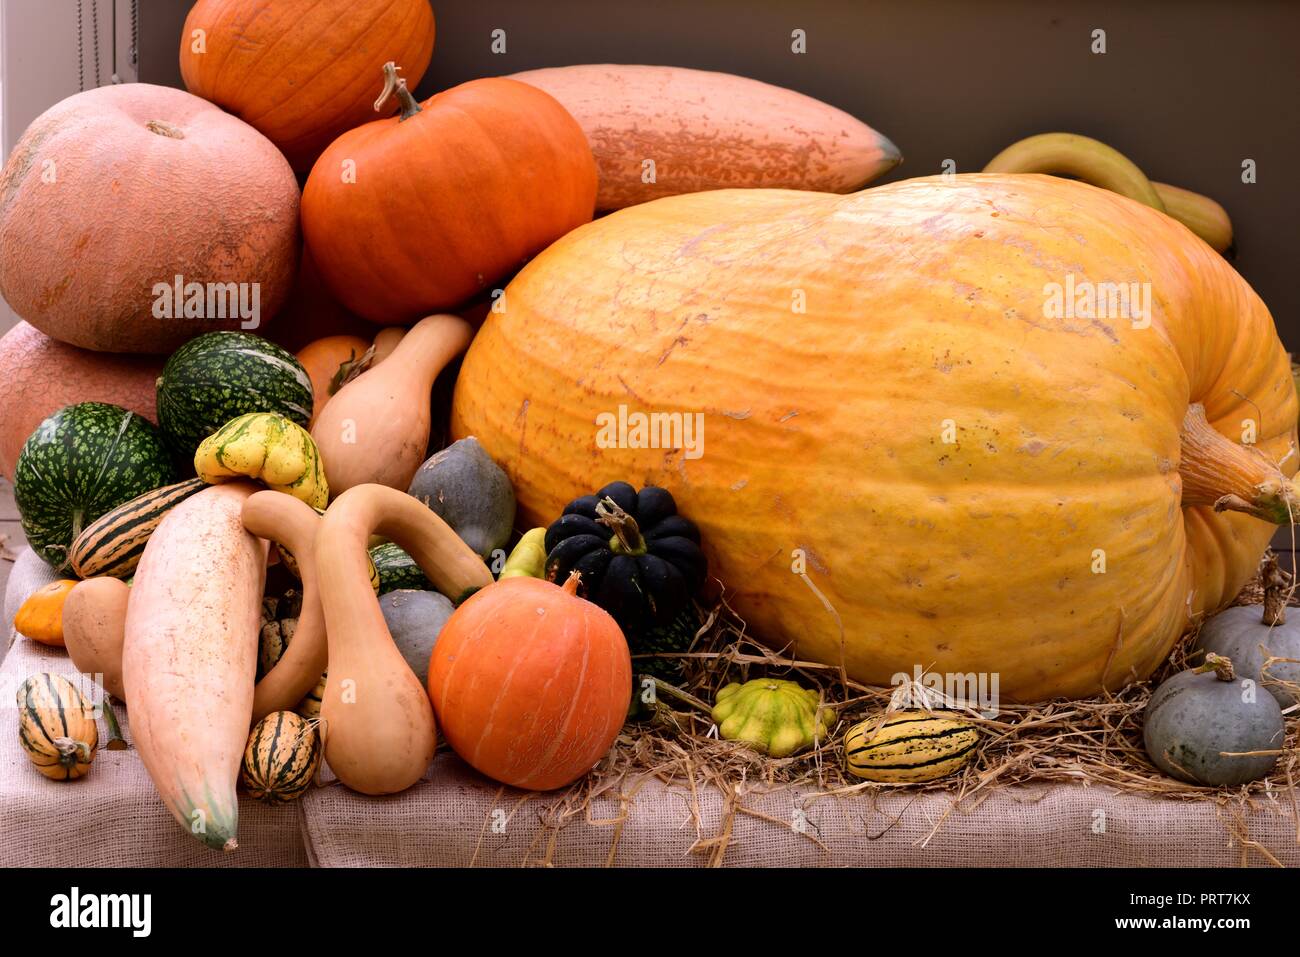 A heap of pumpkins, gourds and squashes Stock Photo